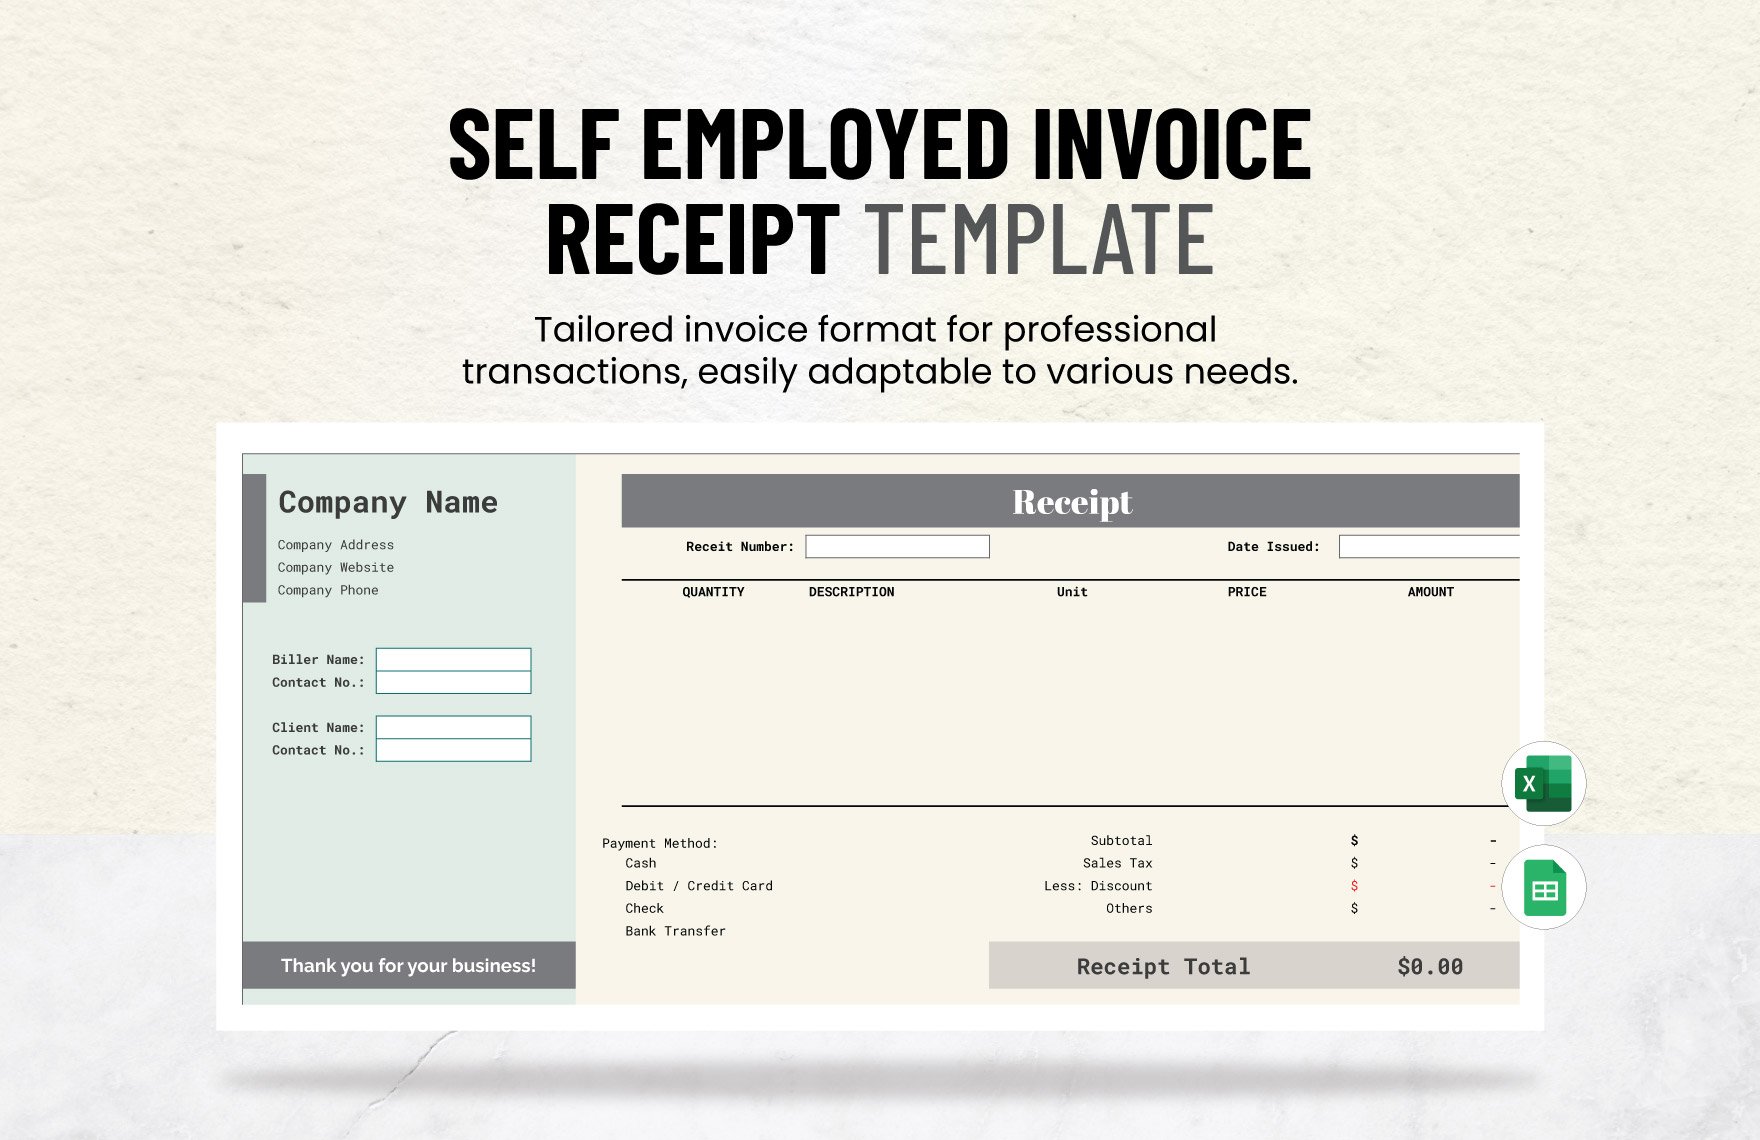 Free Self Employed Invoice Receipt Template in Excel, Google Sheets